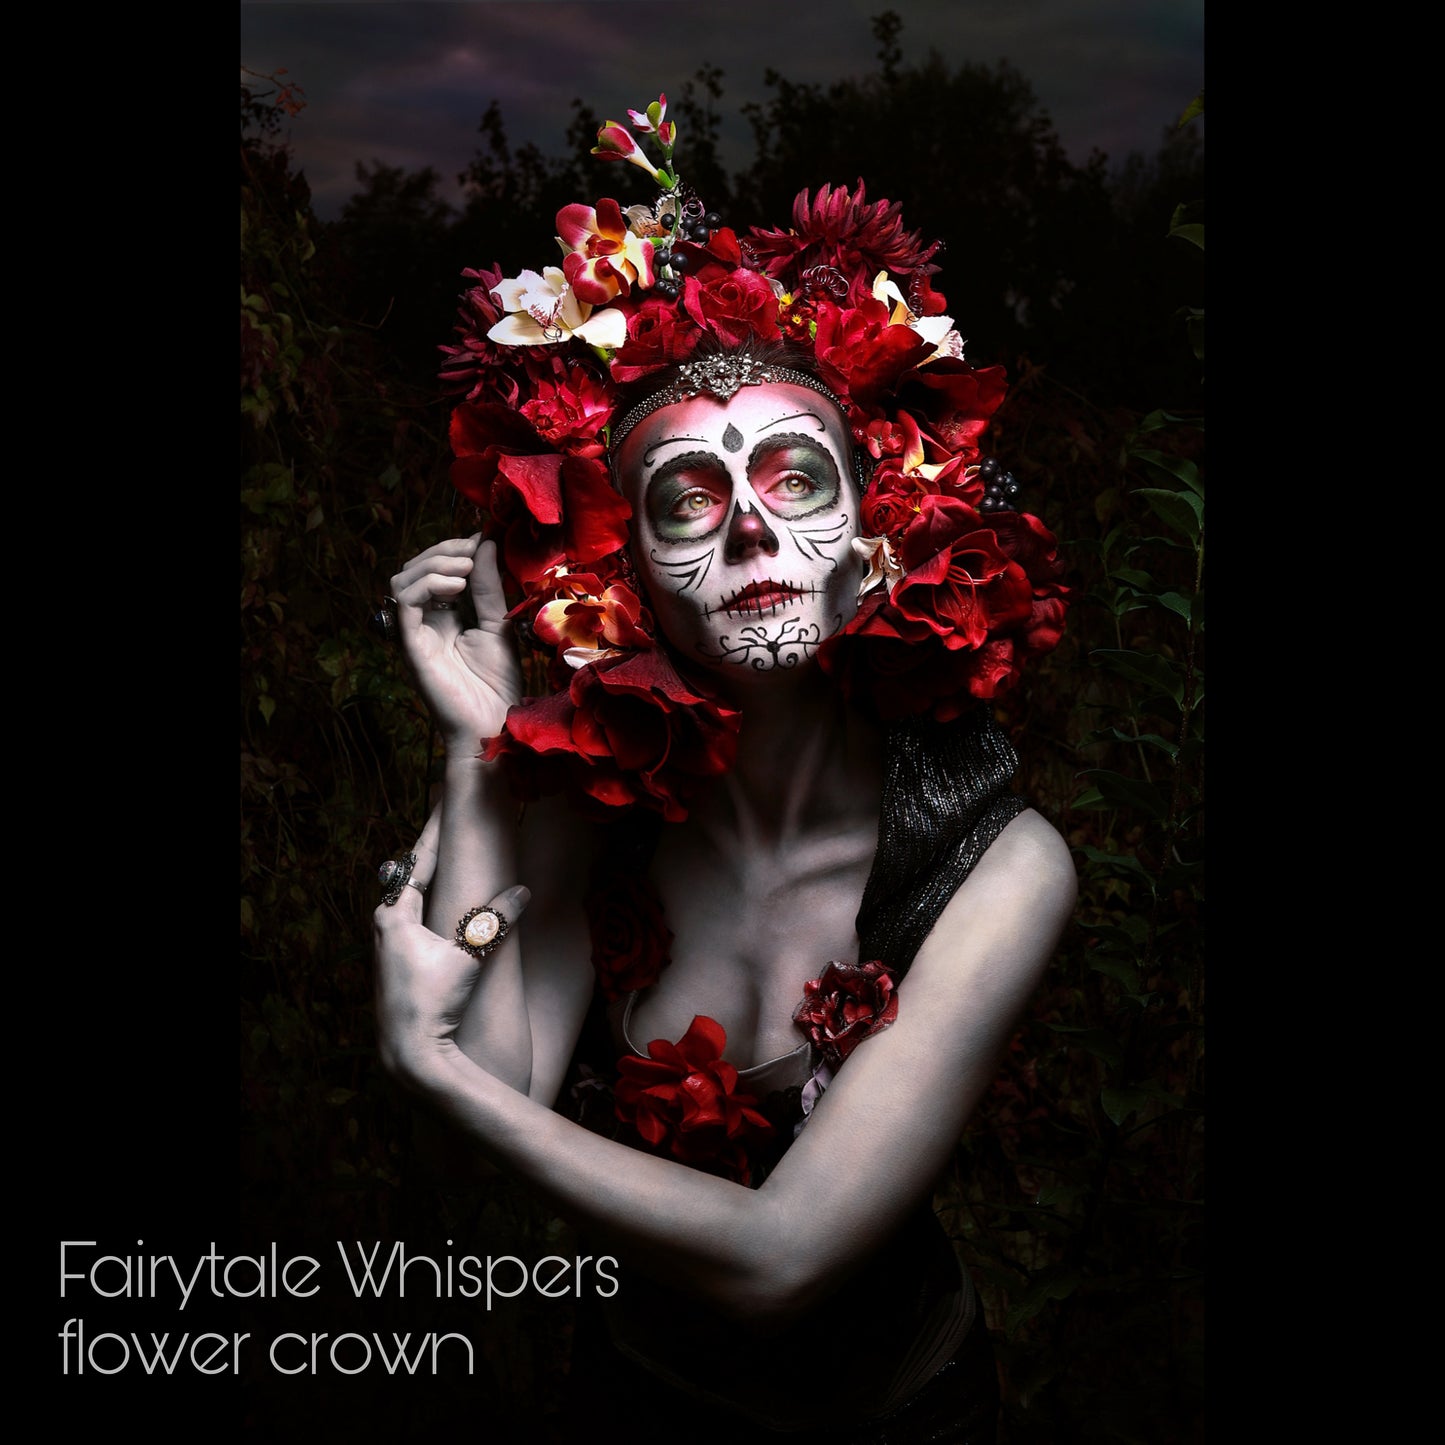 The Fairytale Whispers Flower Crown